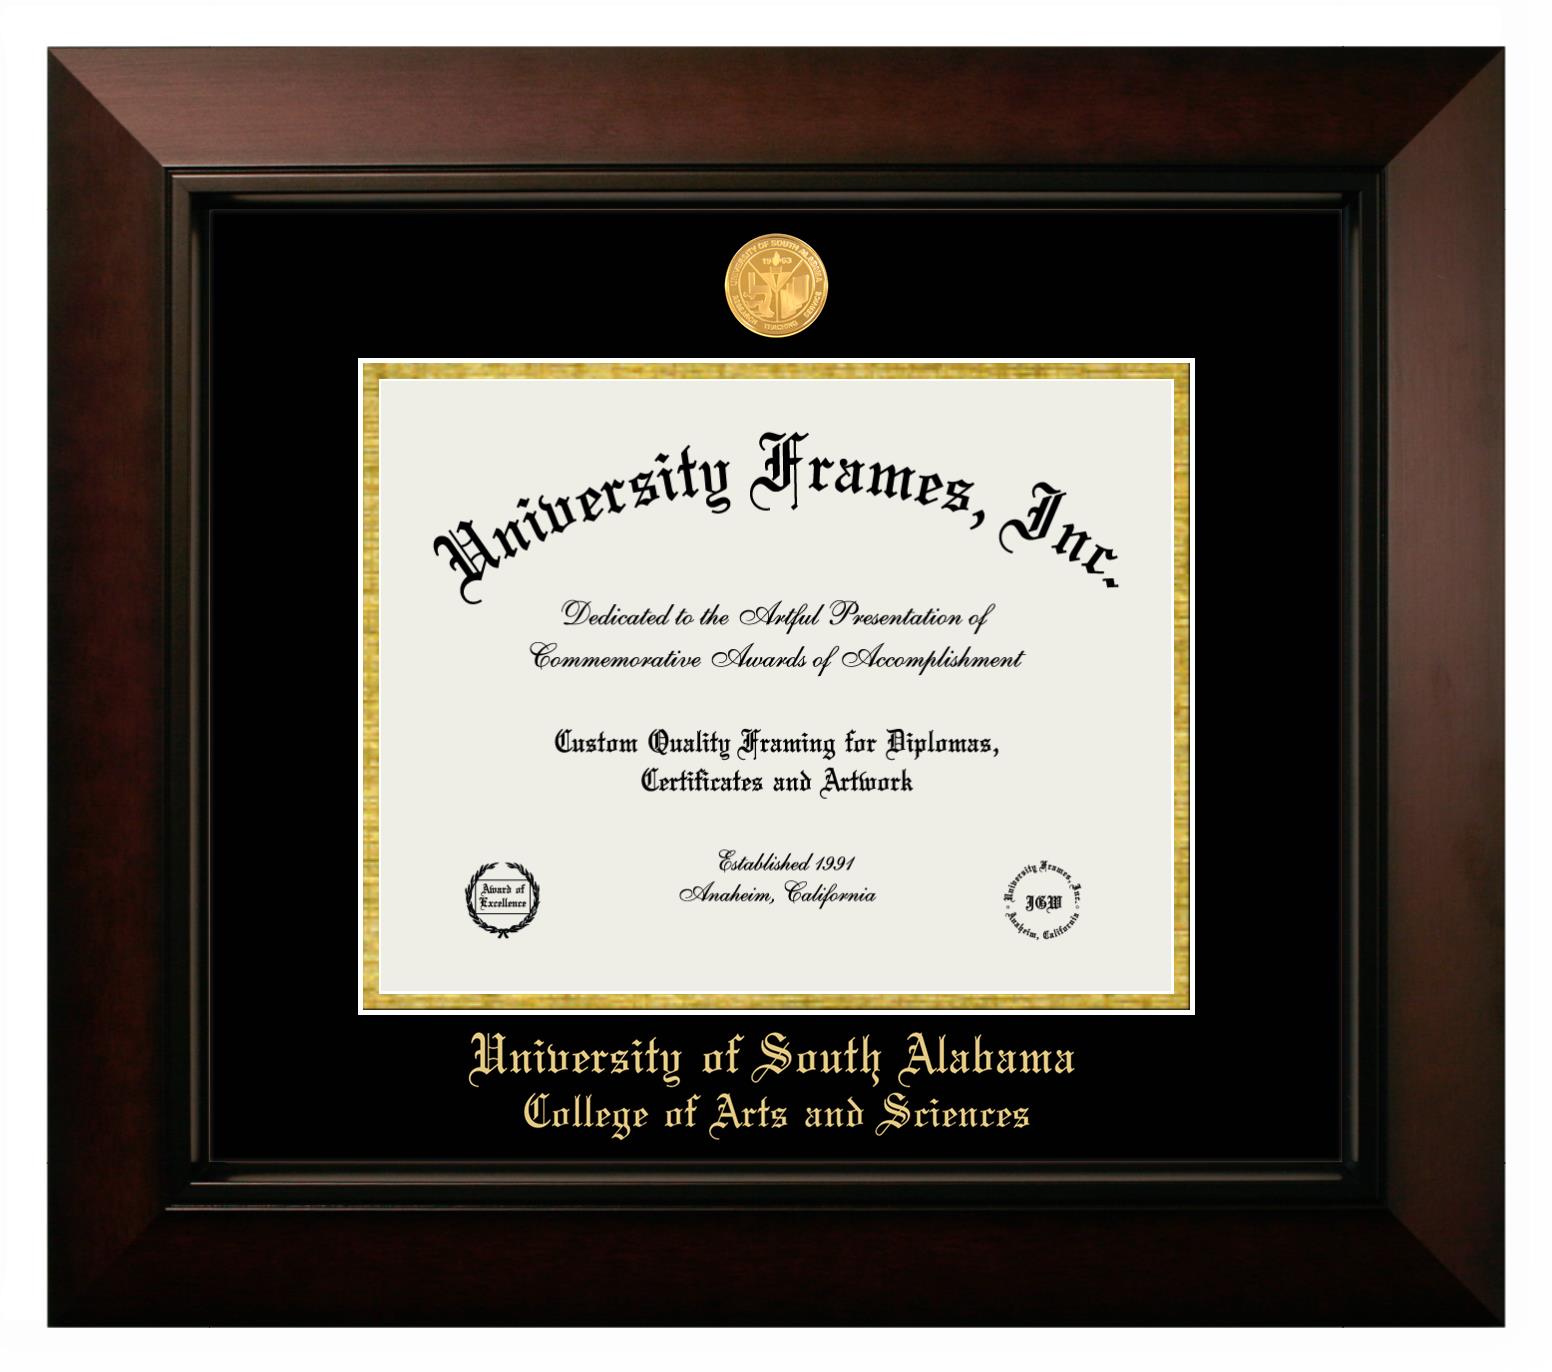 University of South Alabama College of Arts and Sciences Diploma with 5